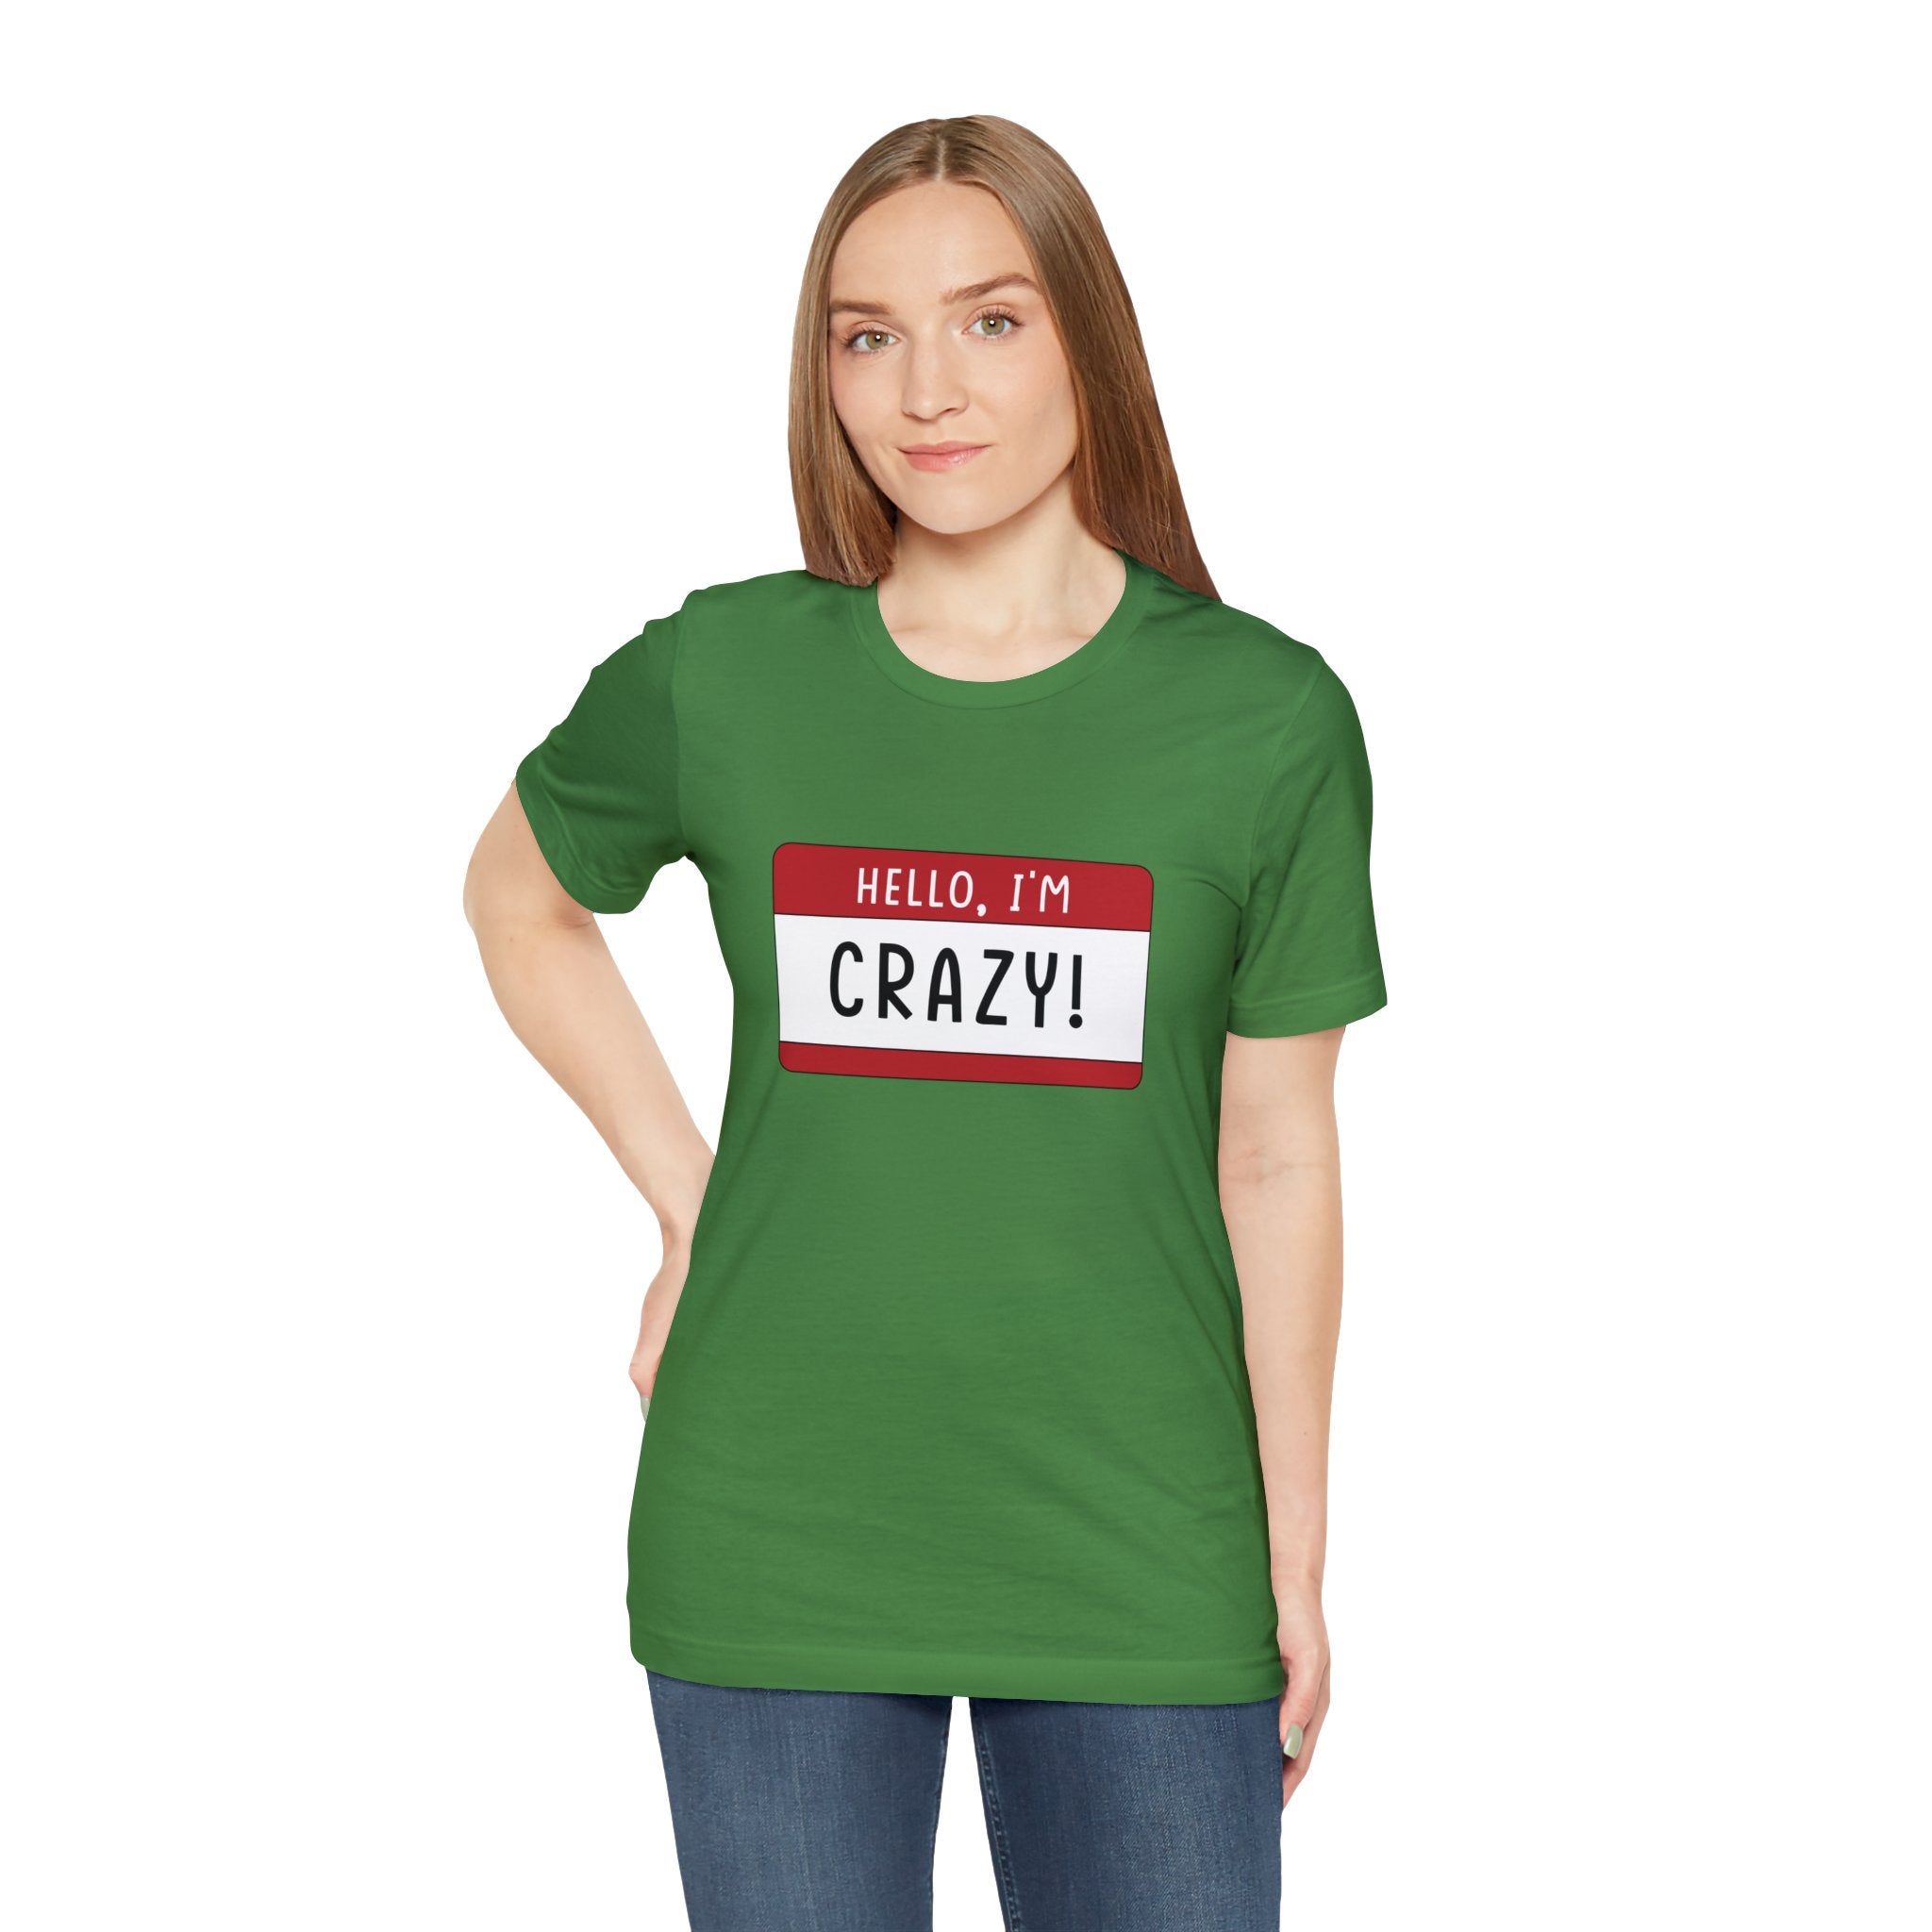 Woman in a Hello, I'm CRAZY T-shirt with a name tag printed on the front, standing against a plain background.